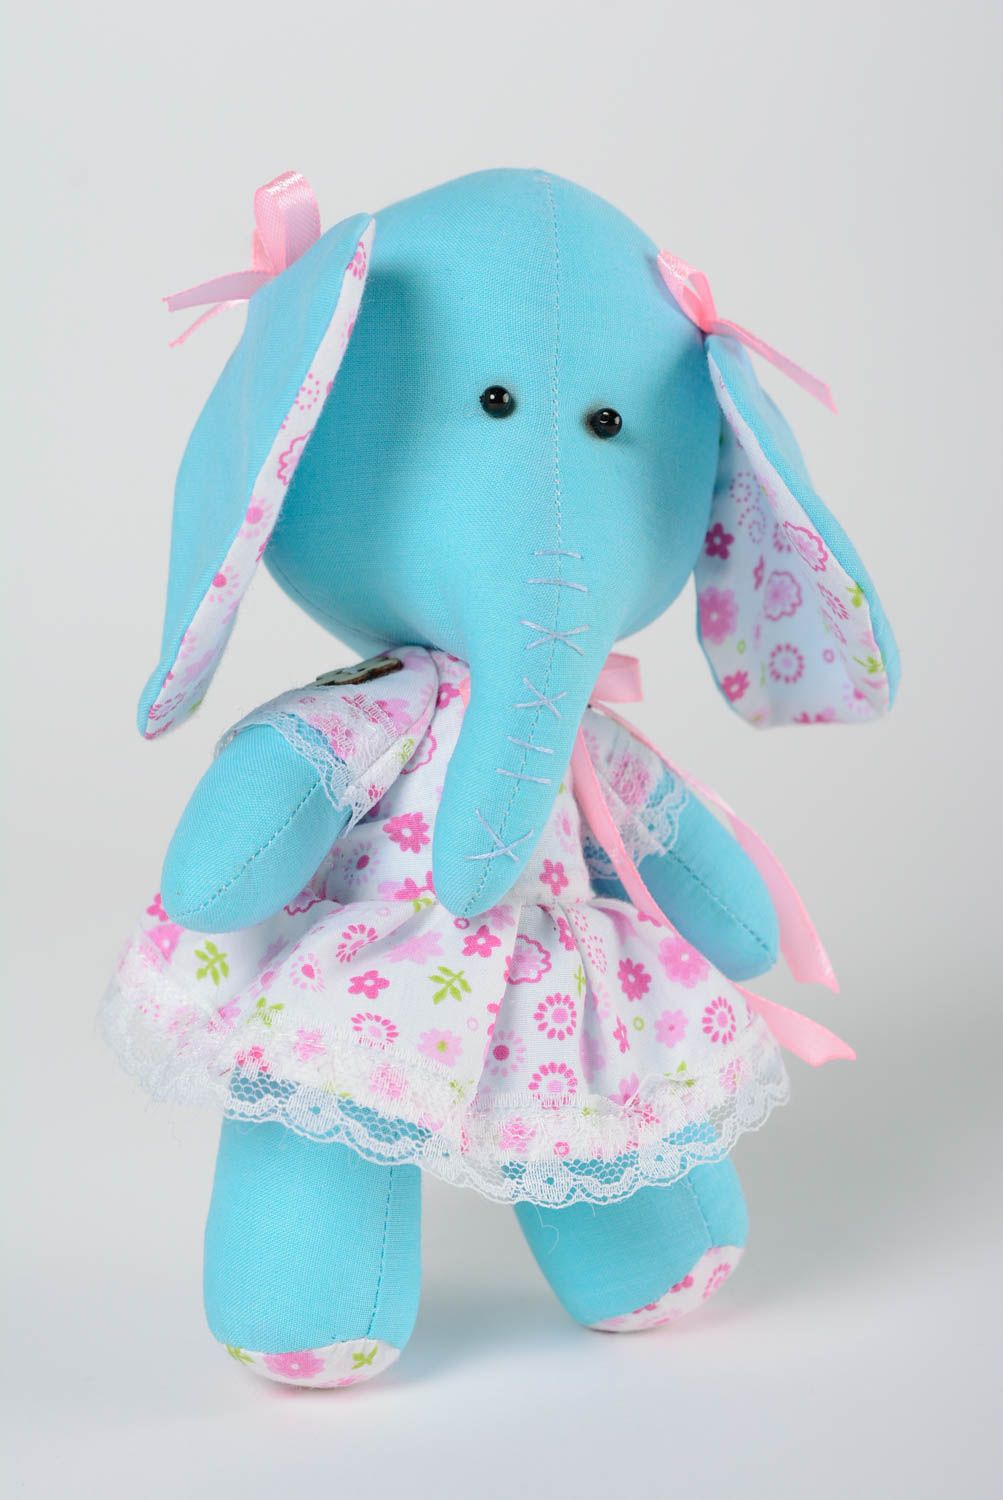 Handmade small cotton fabric soft toy blue elephant girl in floral dress photo 2